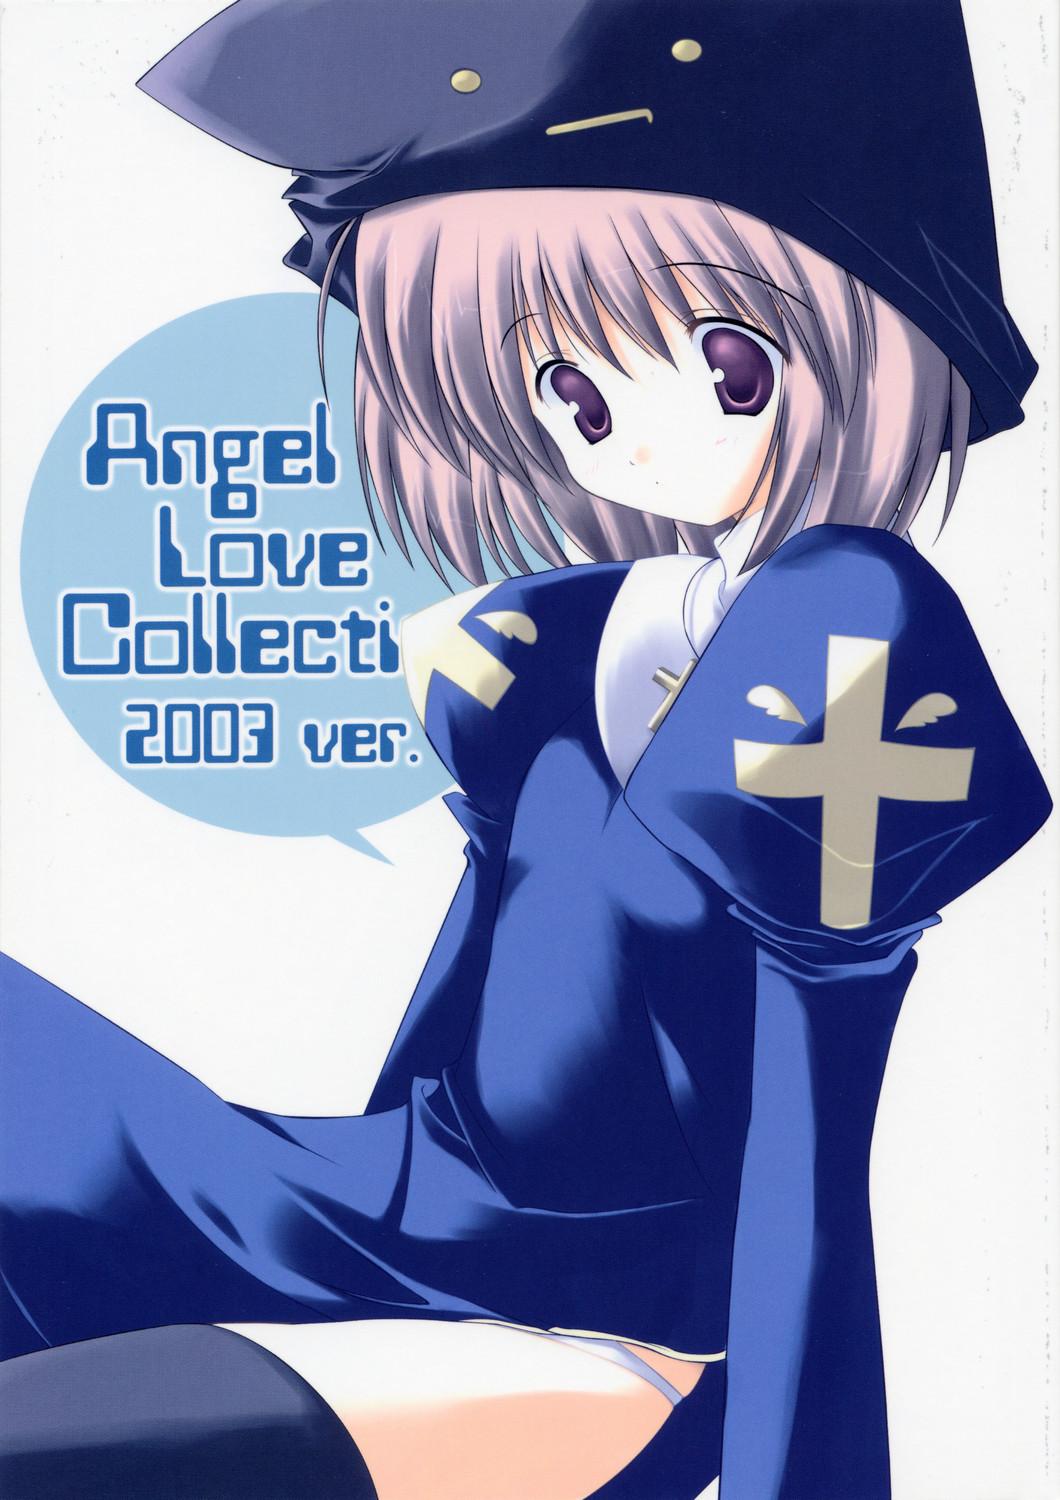 Angel Love Collection 2003 ver. 0